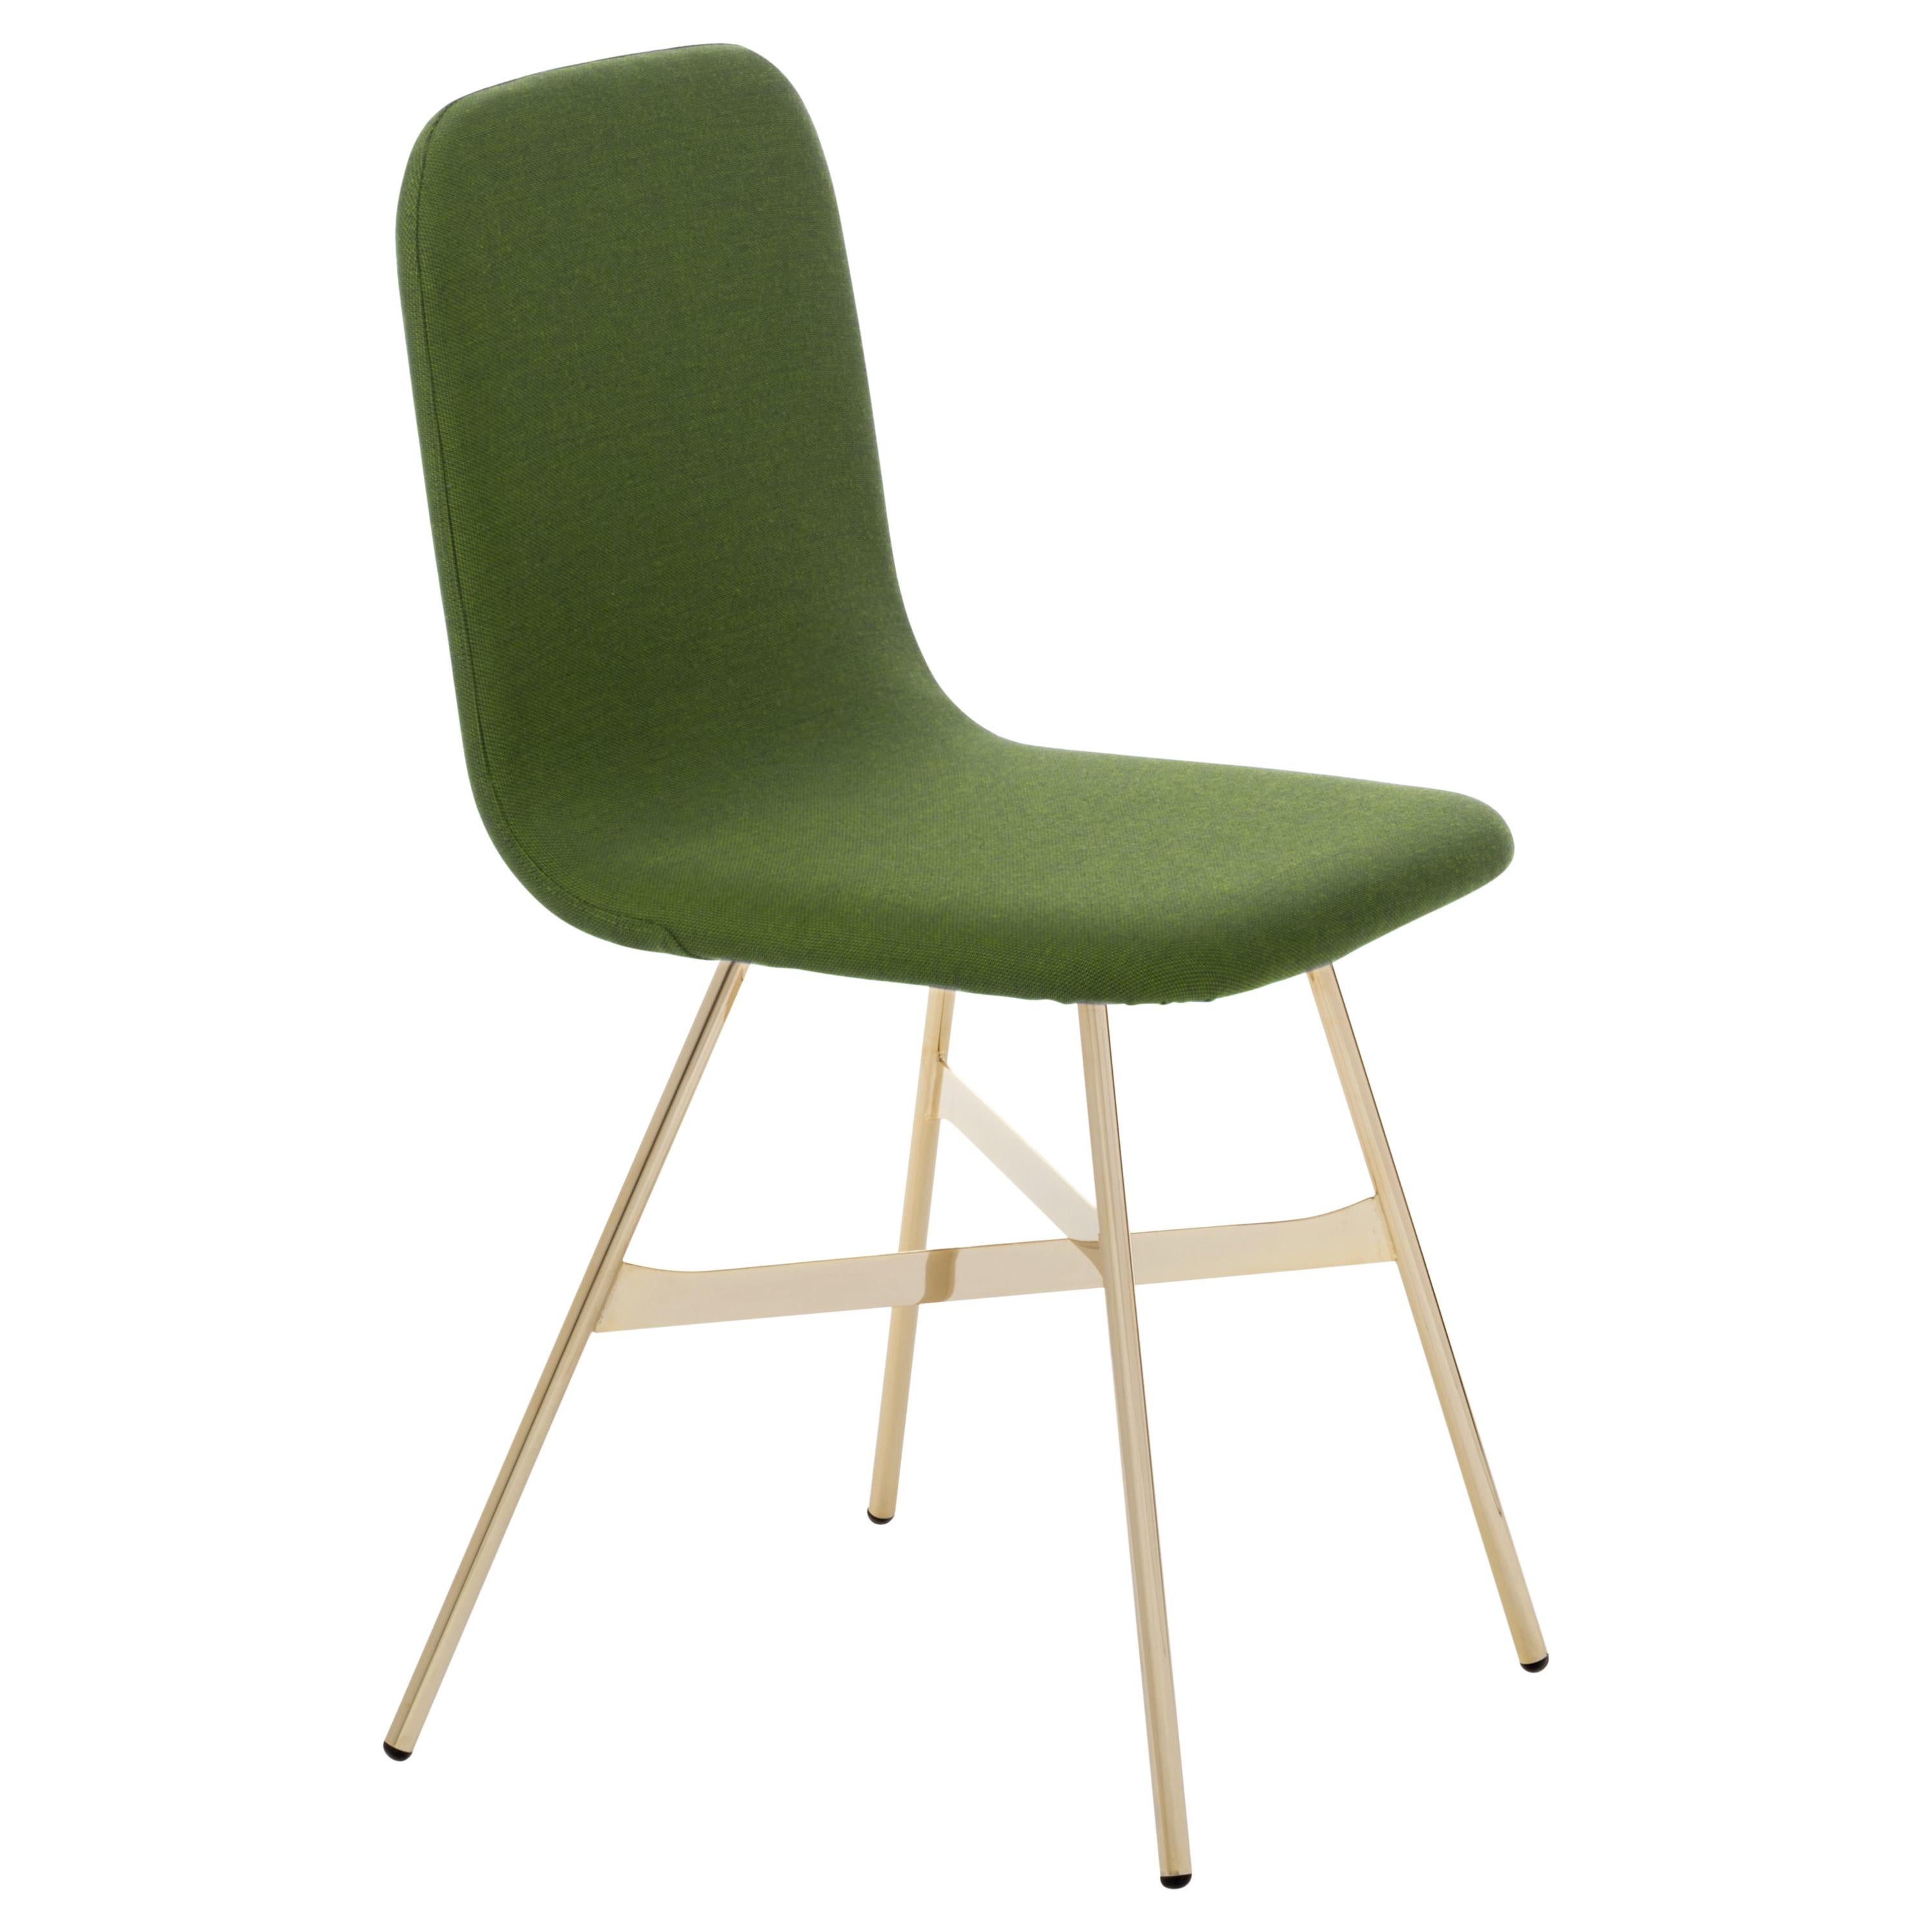 Tria Simple Chair Golden Legs Upholstered in Fine Palm Green Wool, Made in Italy For Sale